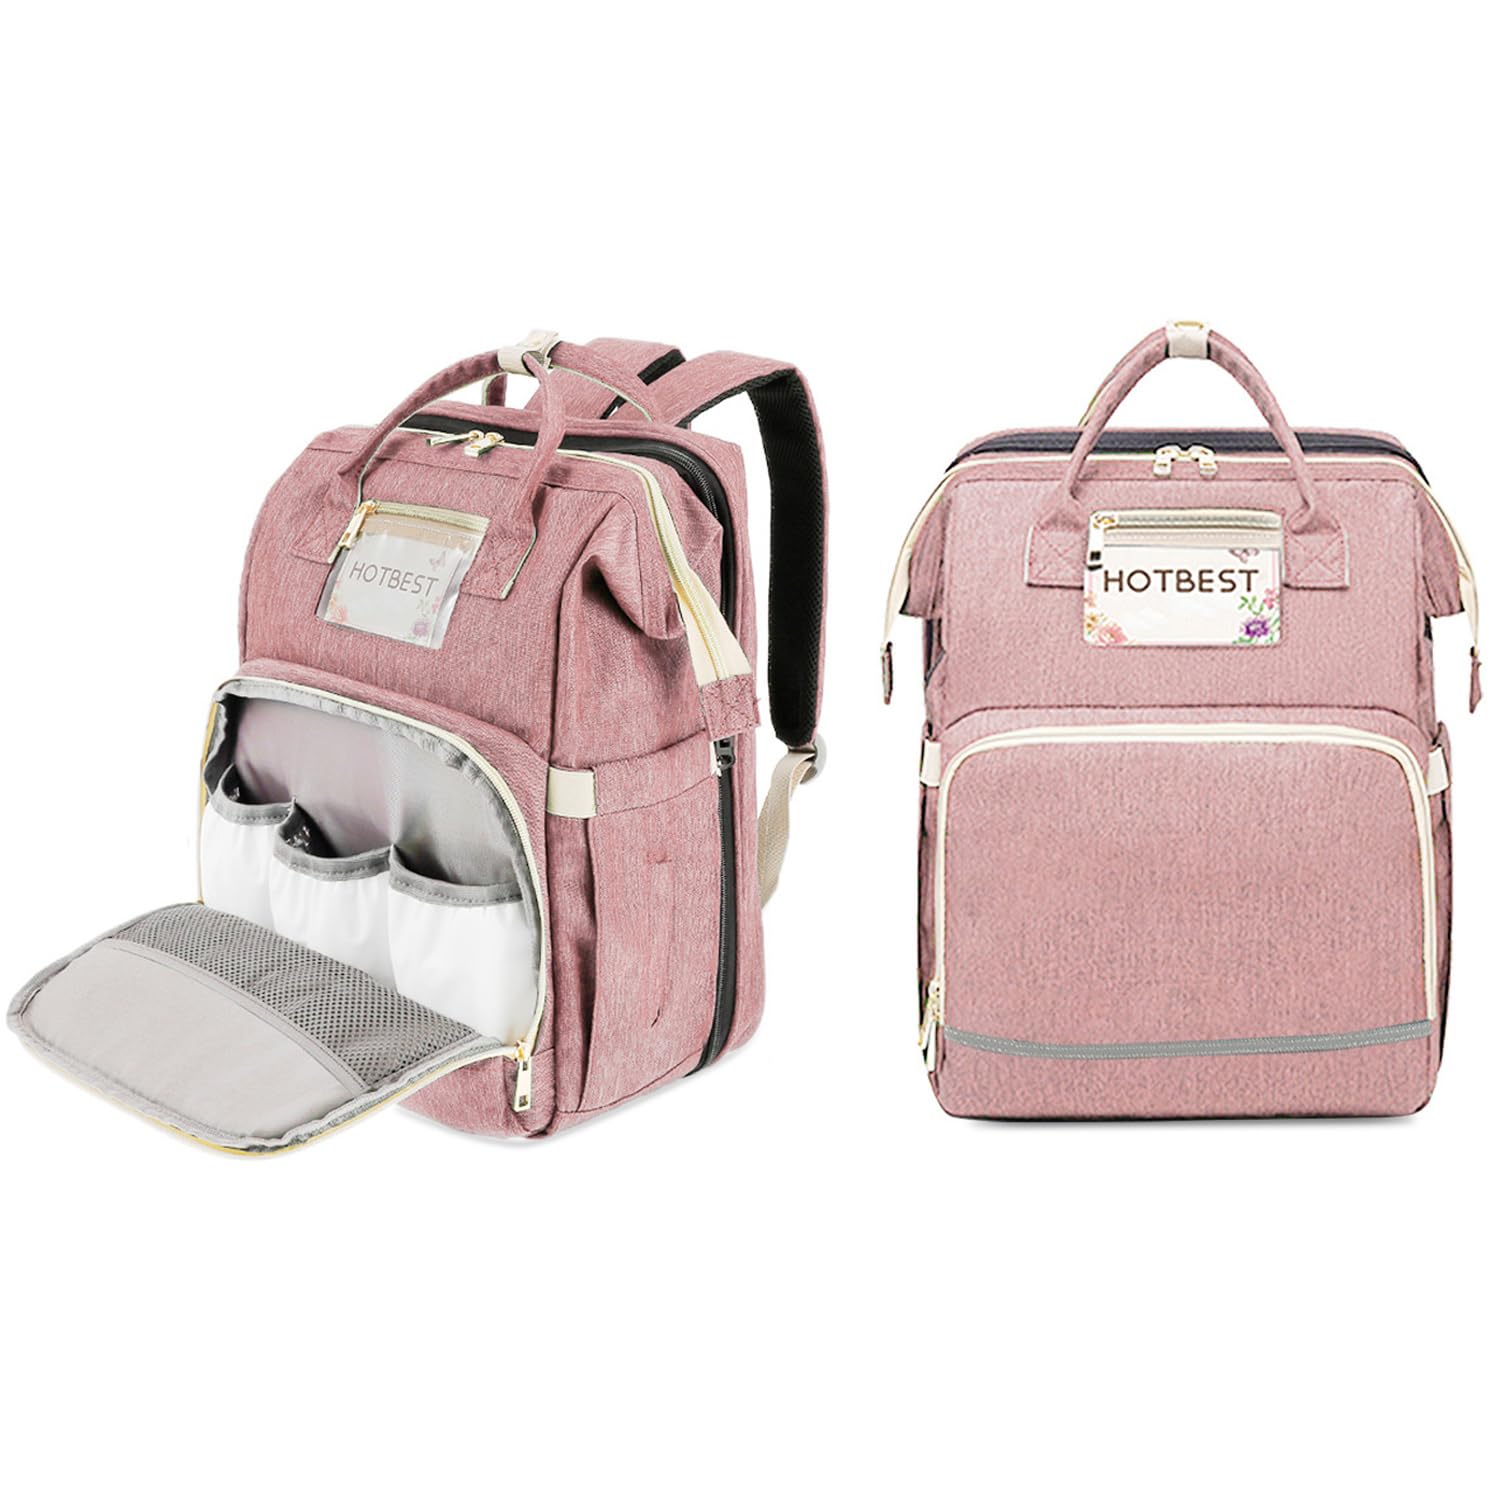 HOTBEST Diaper Bag Backpack, Diaper Bags, Multifunction Waterproof Travel Essentials Diaper Bag with USB port, Newborn Registry Shower Gifts, Unisex and Stylish(Pink)